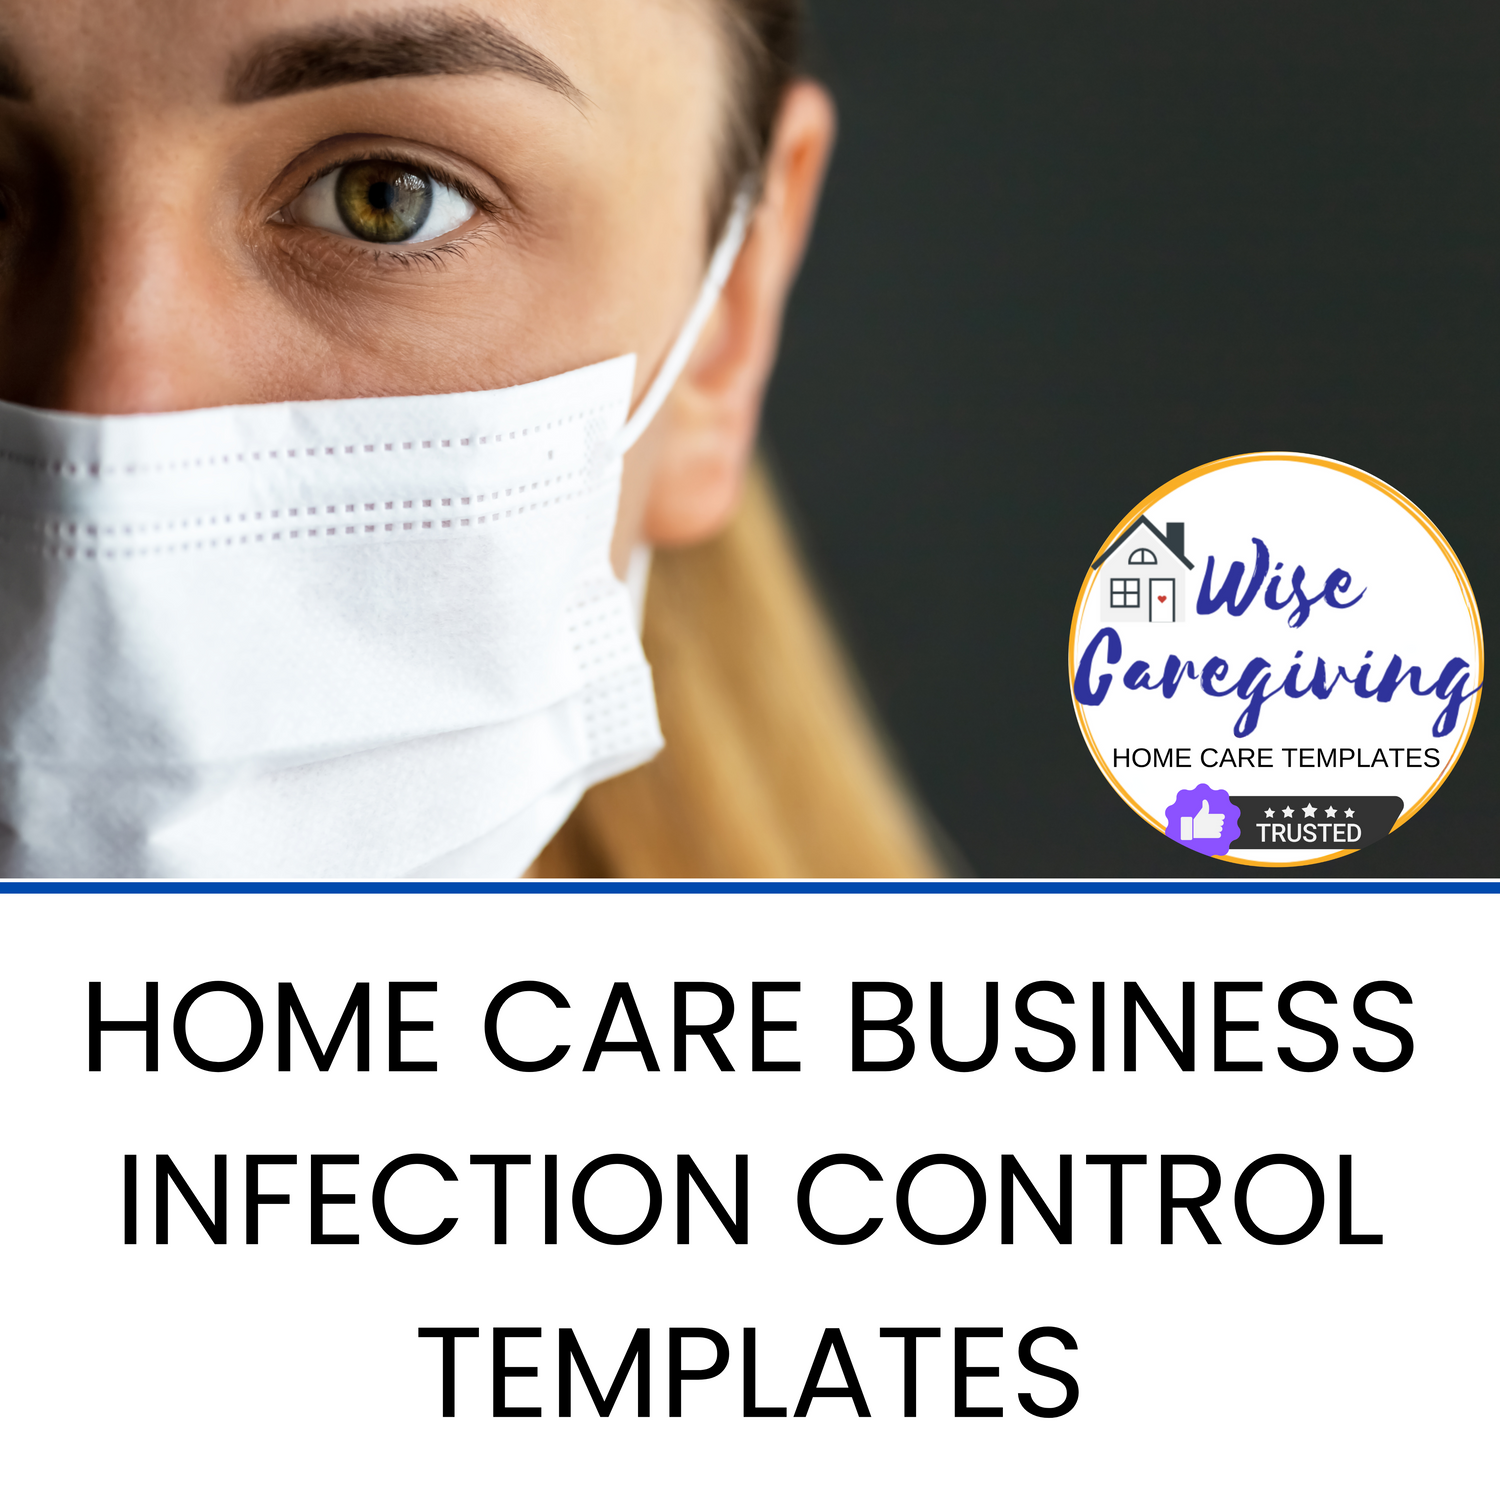 Home Care Business Infection Control Templates